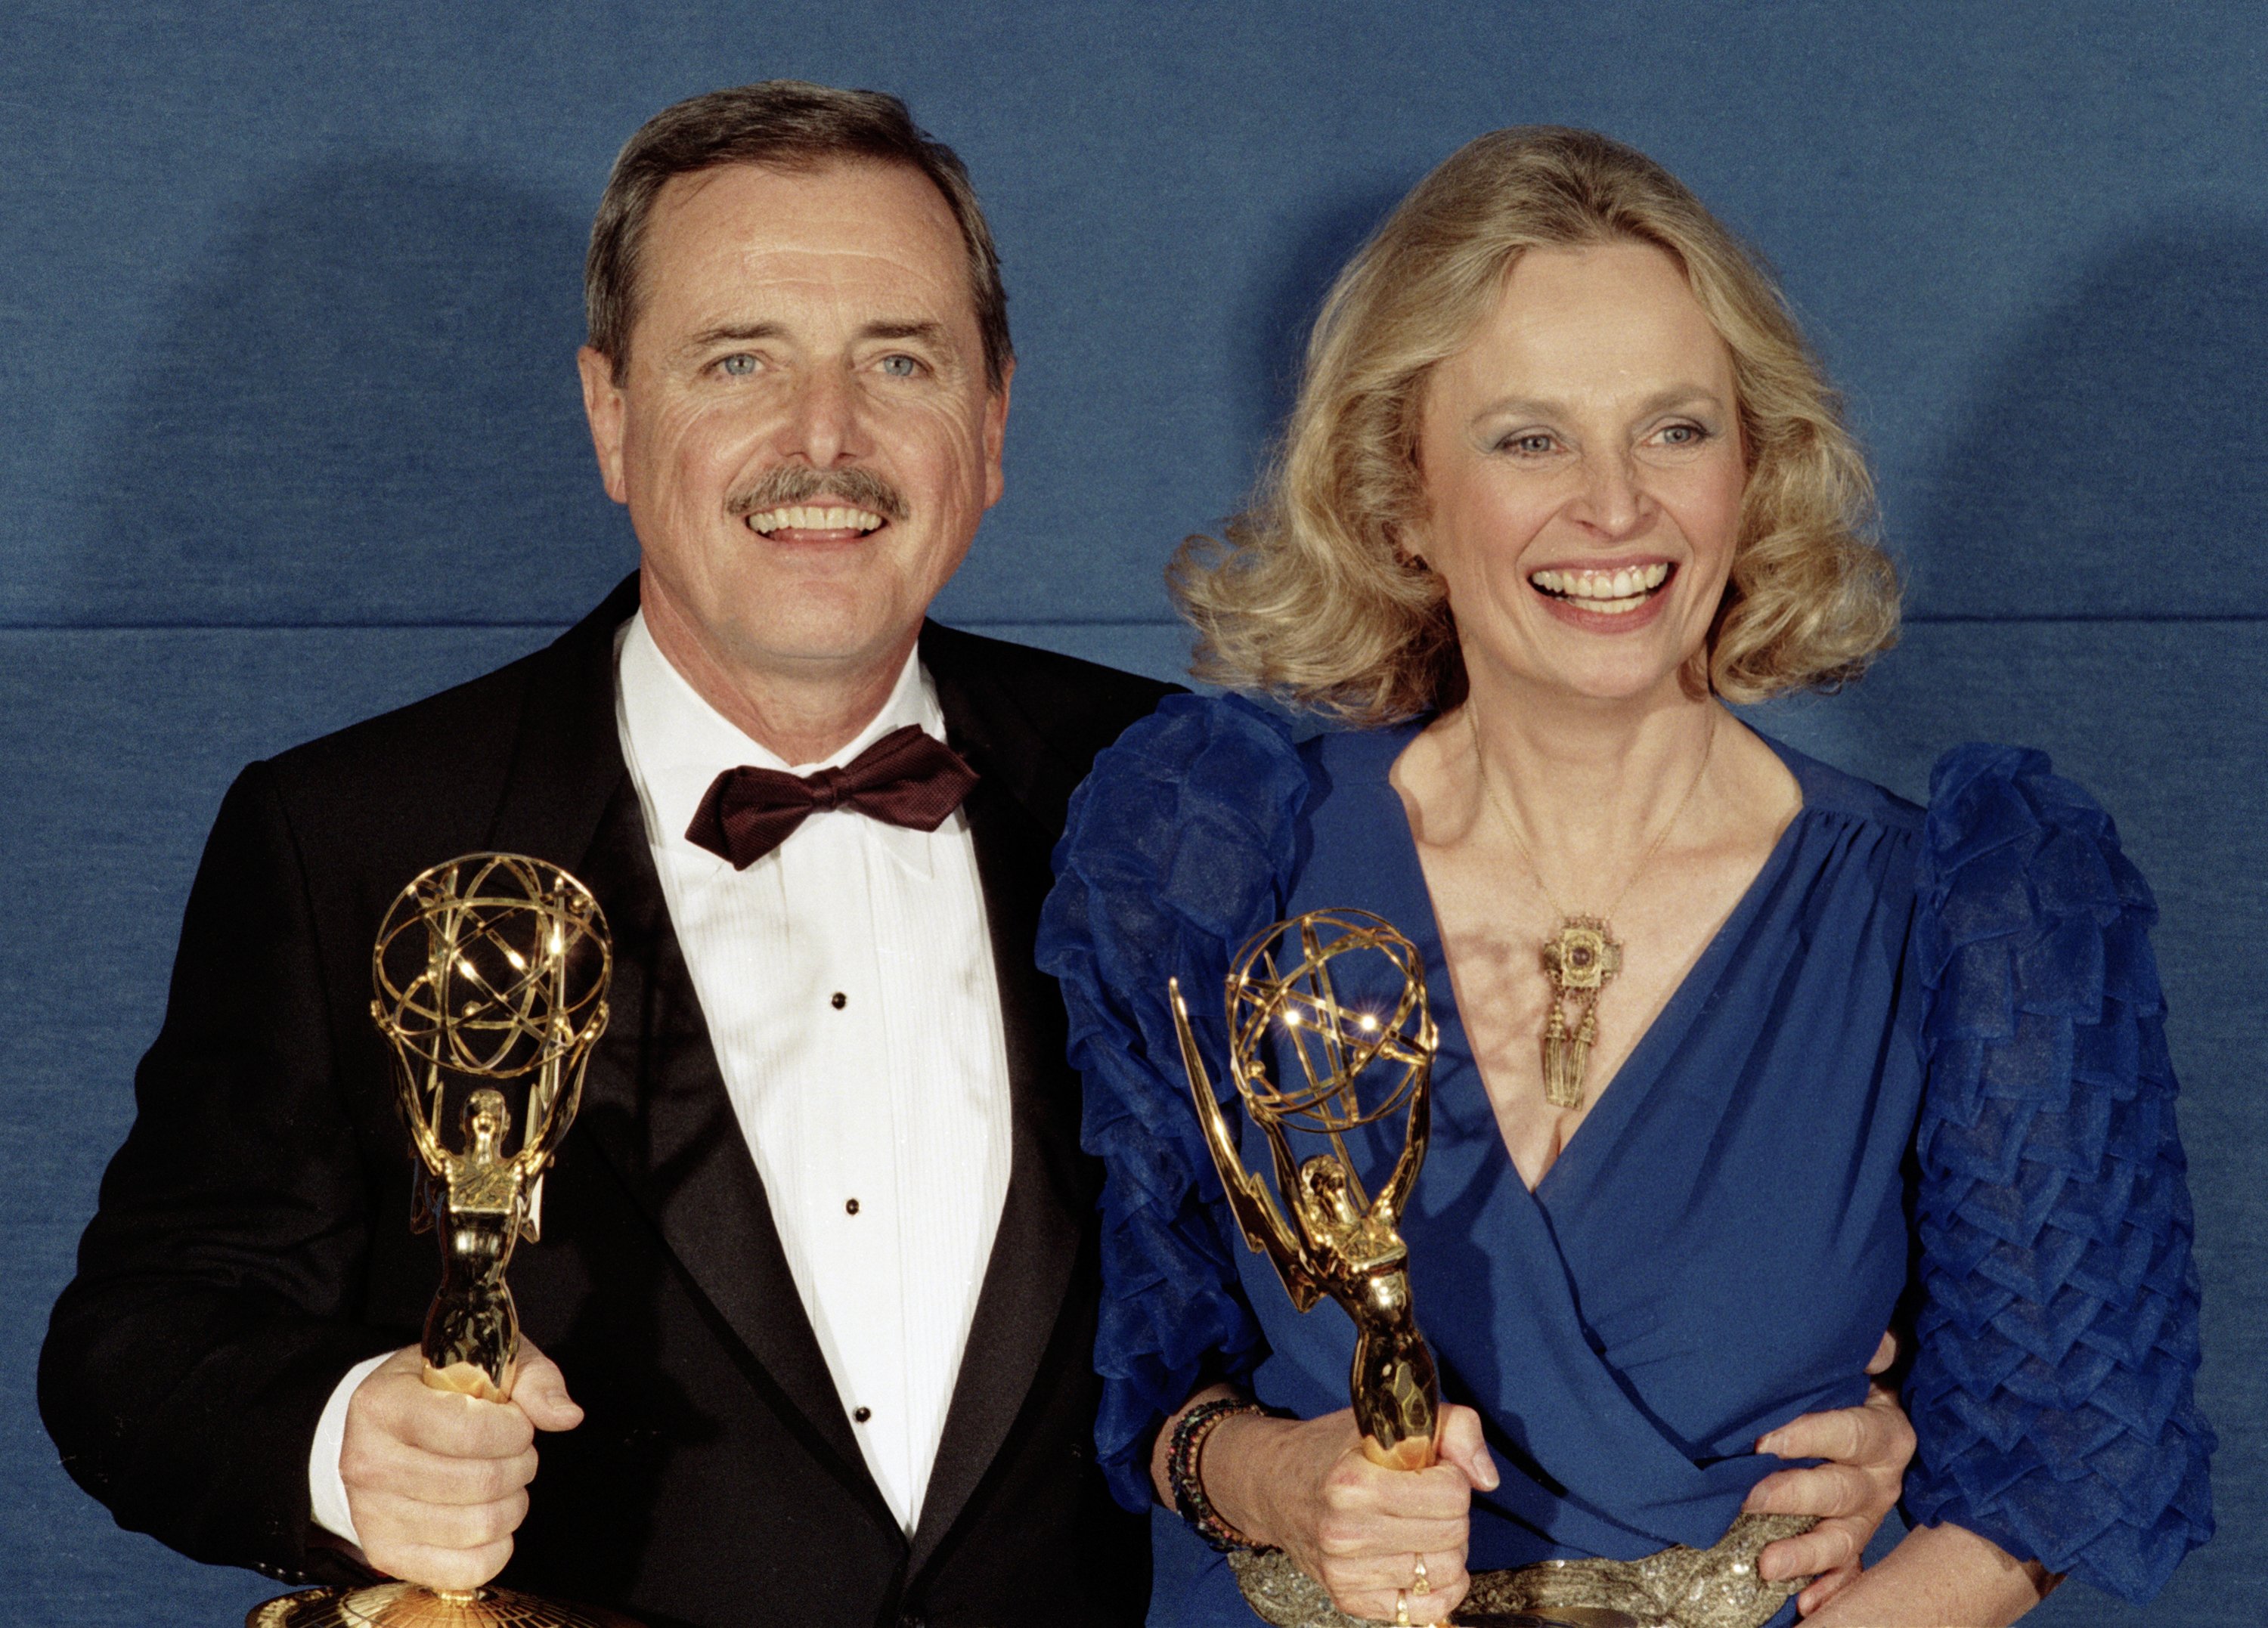 Emmy winners and real-life husband and wife William Daniels and Bonnie Bartlett celebrate their Emmy Awards backstage at the Emmy Awards on September 21, 1986 in Pasadena, California. | Source: Getty Images